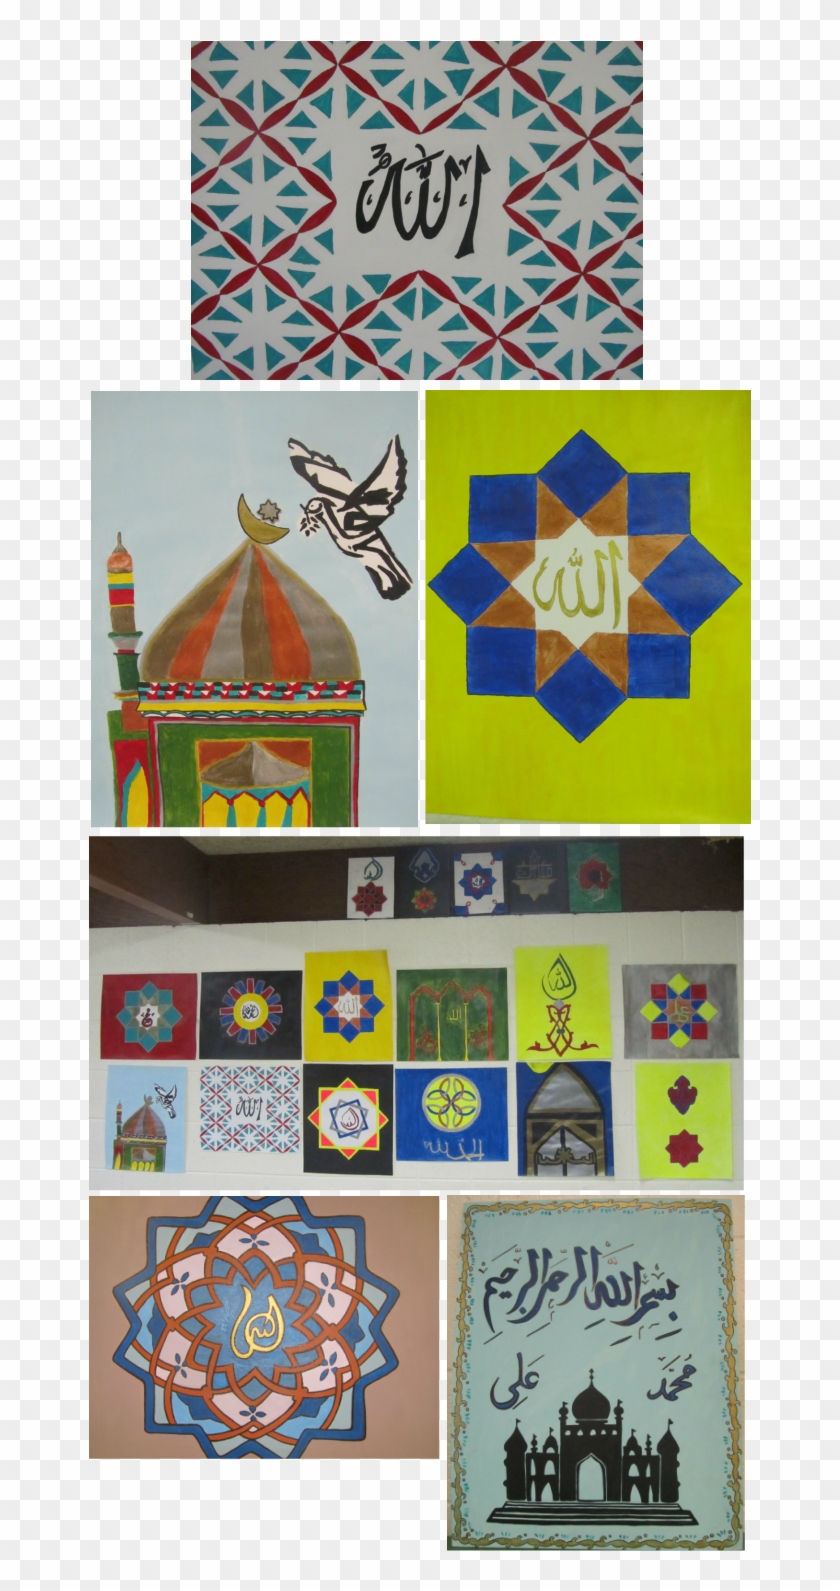 Islamic Art And Design At Wise Academy - Motif Clipart